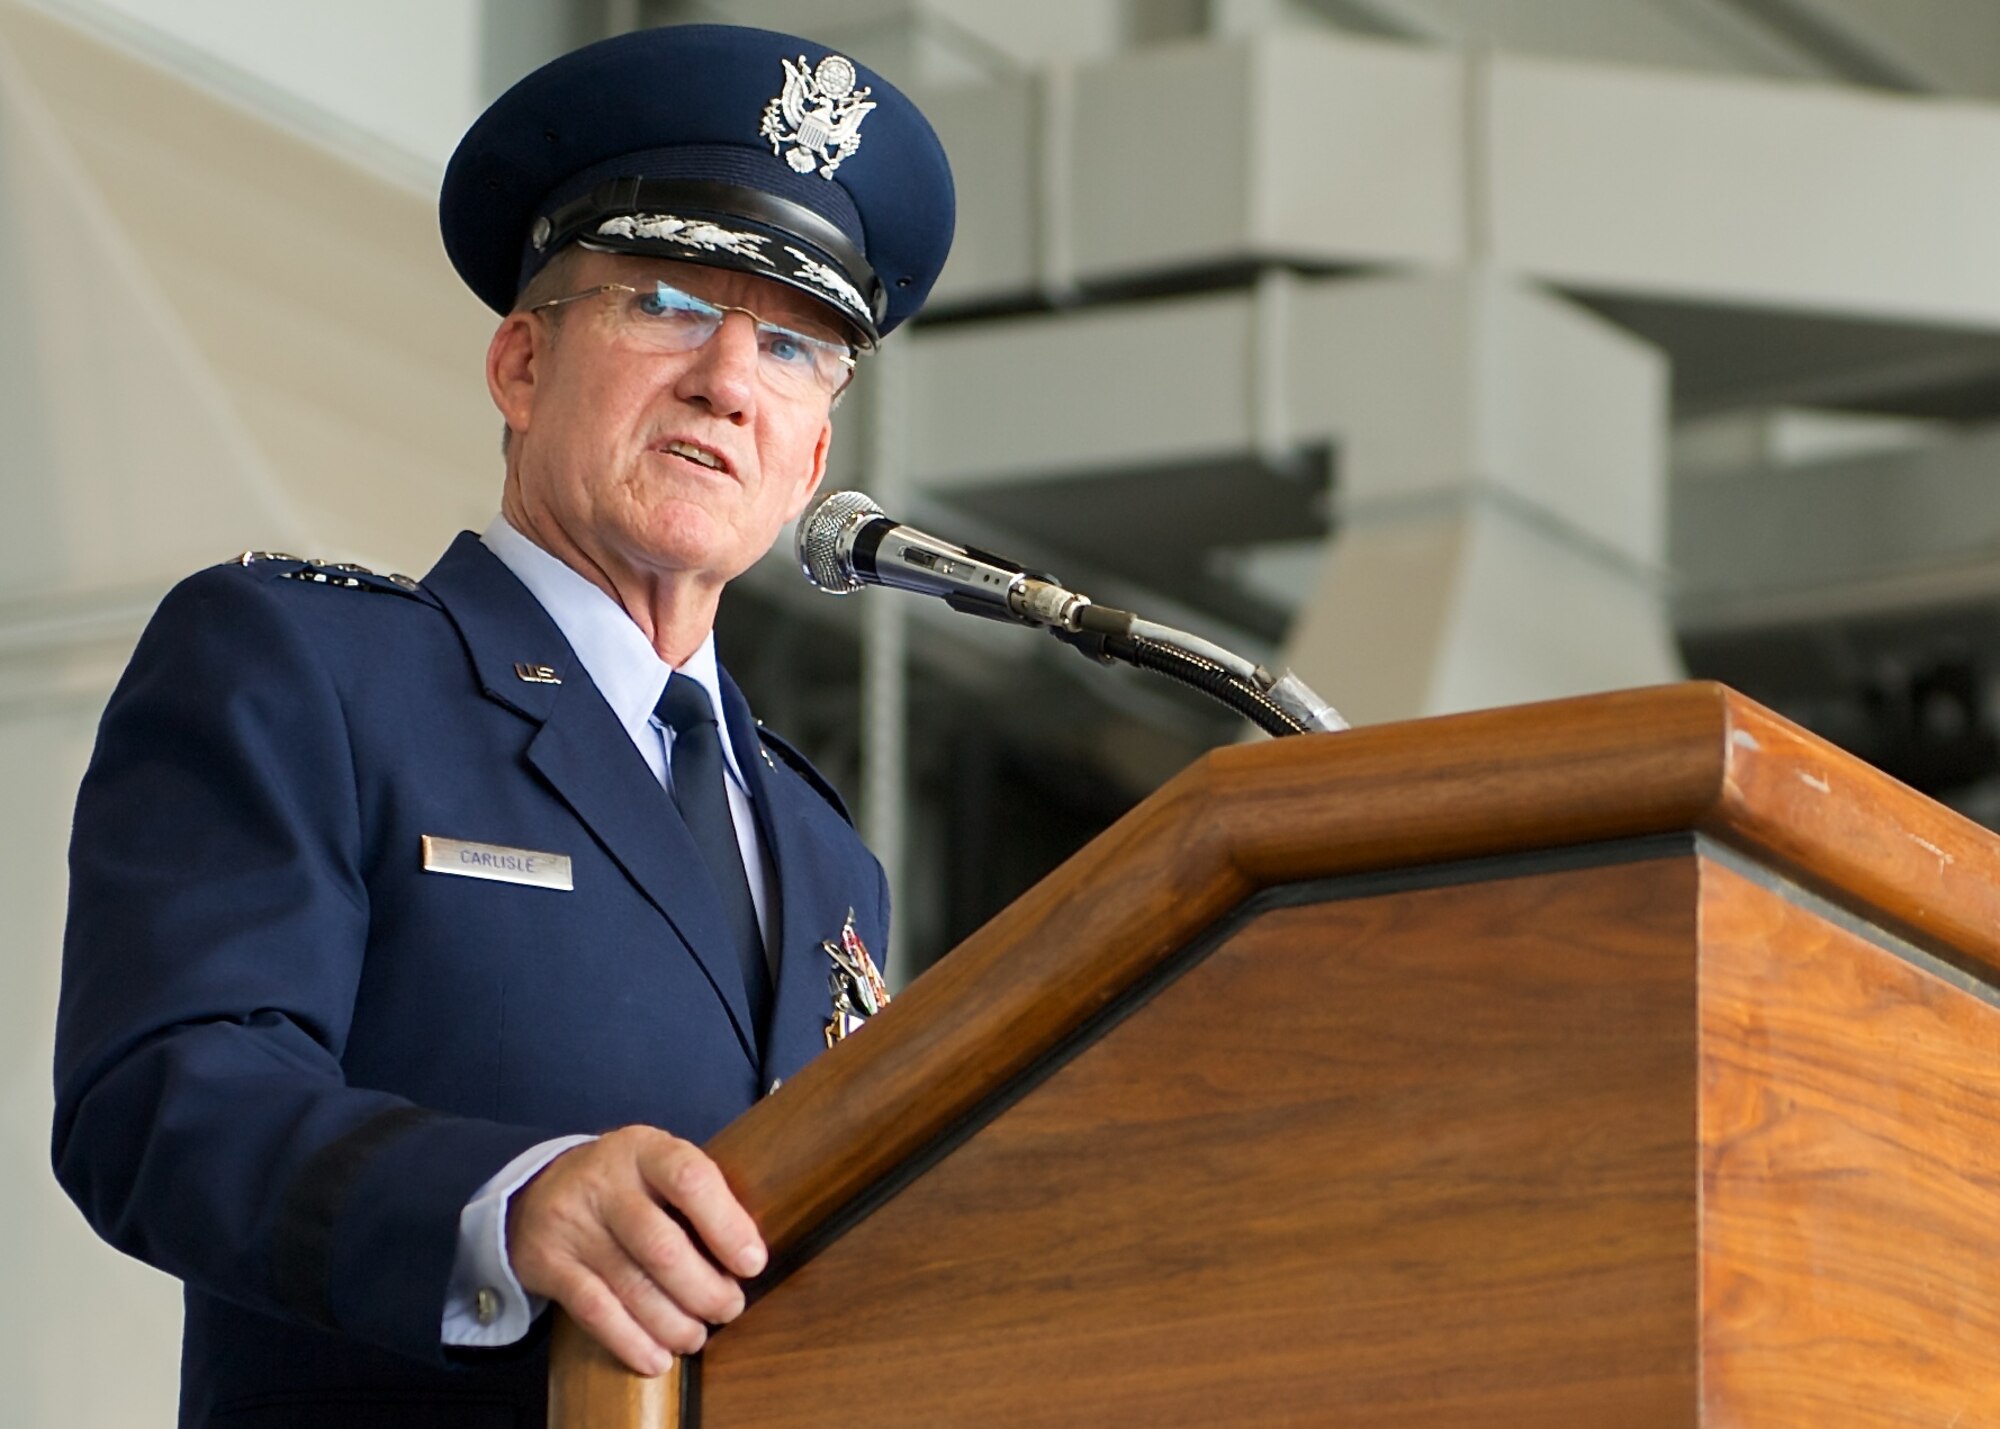 Gen. Hawk Carlisle, outgoing Pacific Air Forces commander, addresses Airmen during the PACAF change of command ceremony Oct. 16, 2014, at Joint Base Pearl Harbor-Hickam, Hawaii. Carlisle led Airmen stationed across half the globe, serving principally in Japan, Korea, Hawaii, Alaska and Guam. (U.S. Air Force photo/Tech. Sgt. James Stewart)